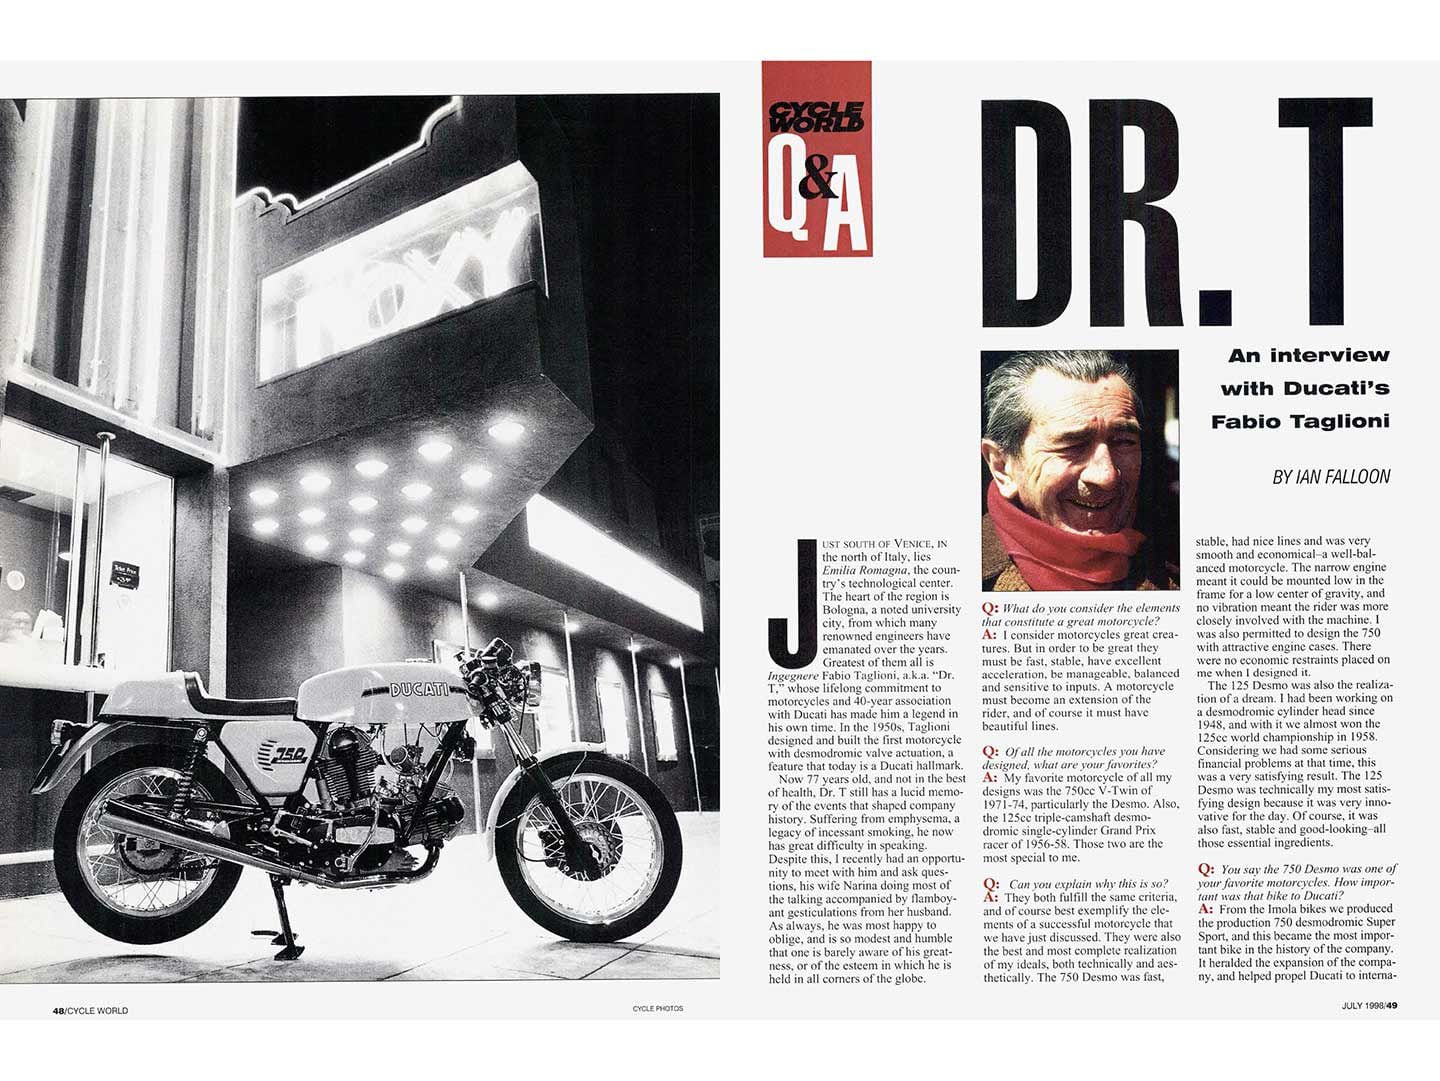 Can’t mention classic Ducatis without mentioning Dr. Fabio Taglioni, the man responsible for bringing Ducati’s first V-twin to life.